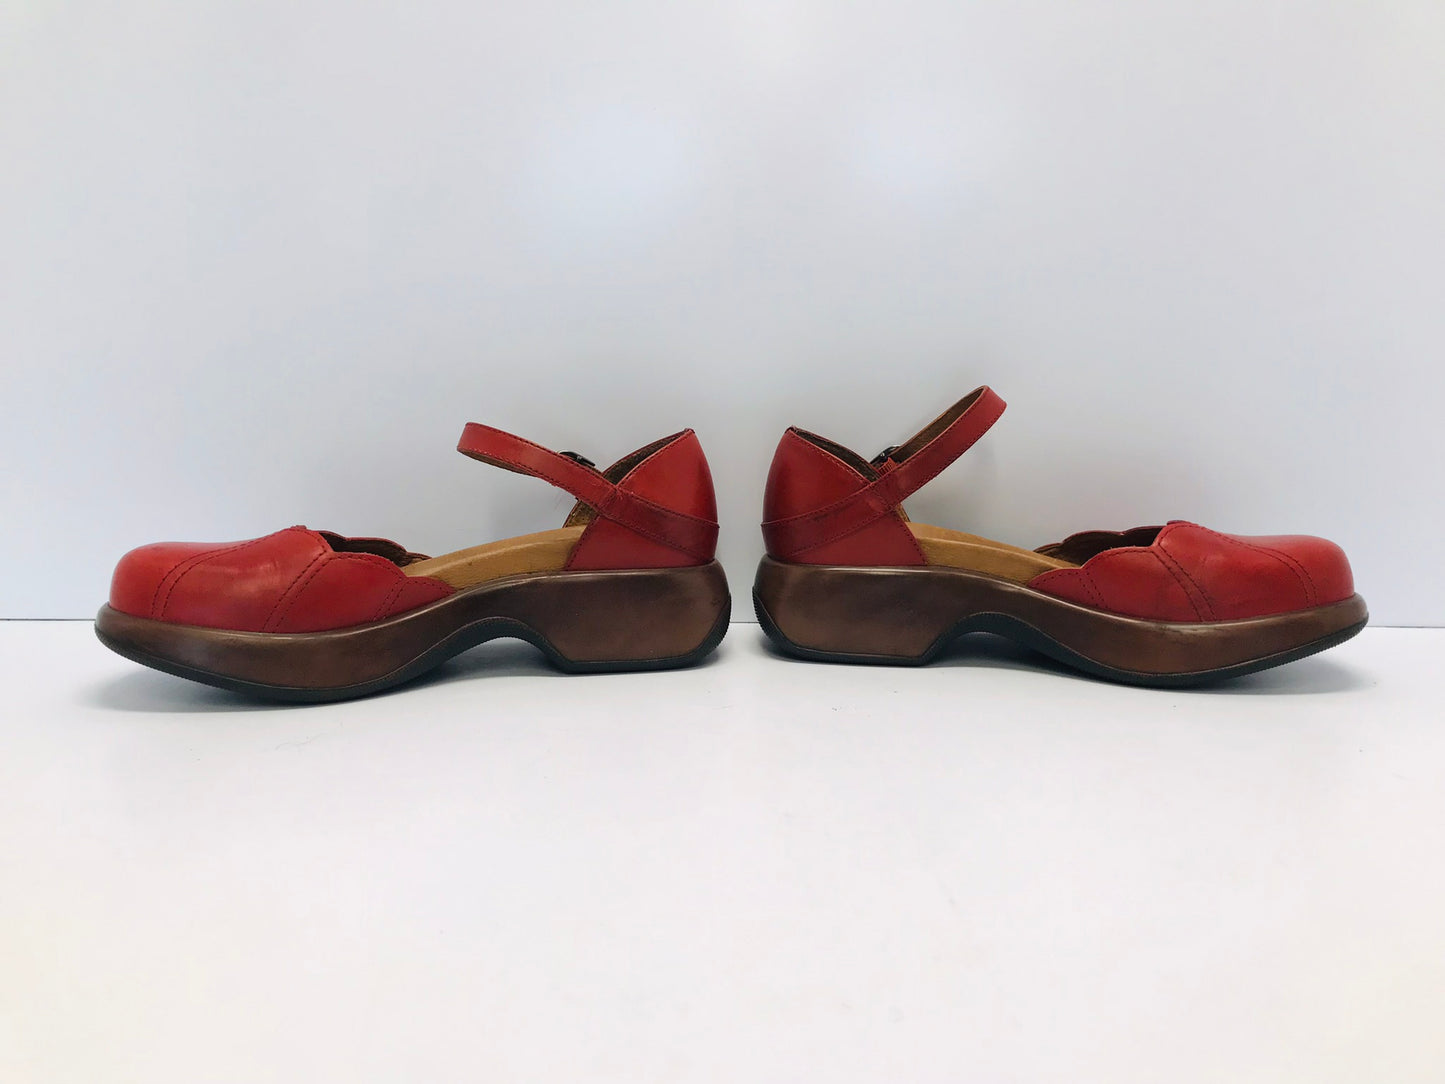 Ladies Dress Shoes Size 8.5 Euro 39 Dansko With Arch Support Leather Made In Europe Red Worn Once Retail 239.99